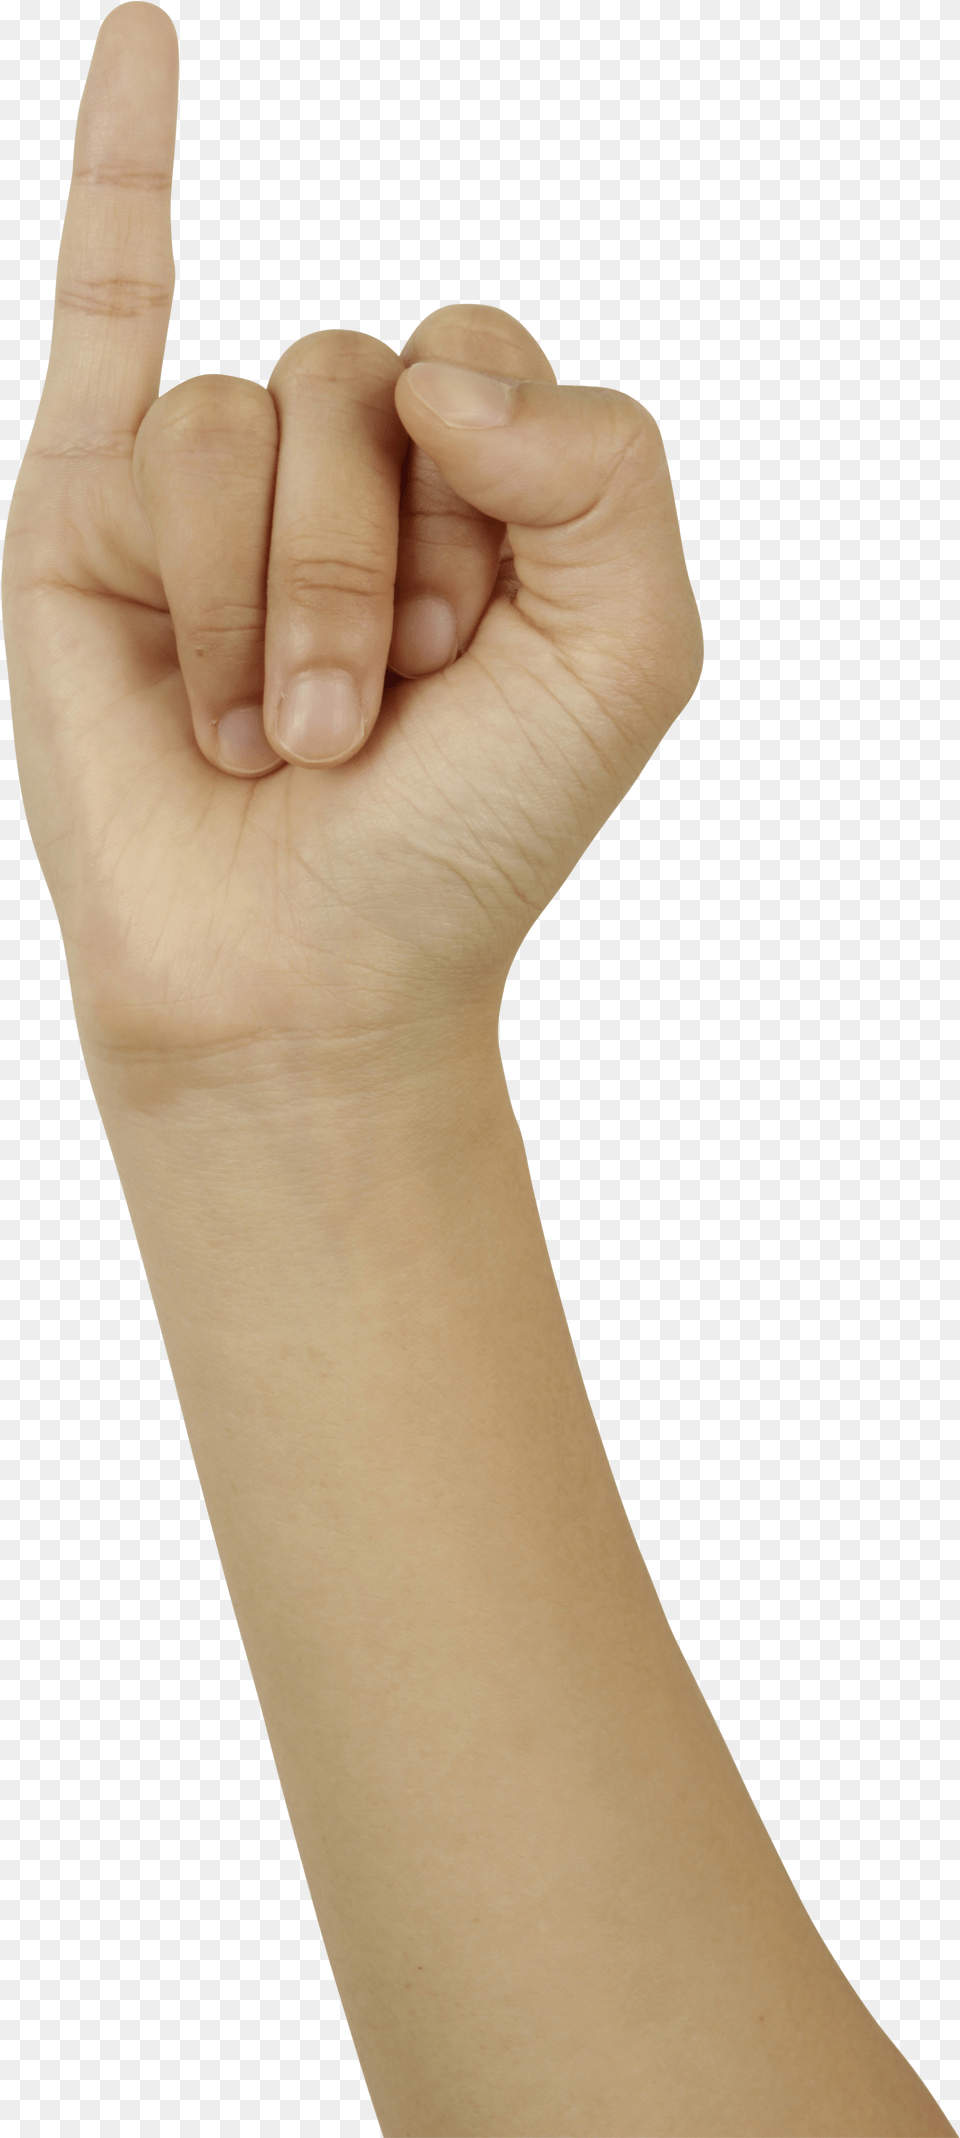 Download Pinky Finger For Pinky Finger Png Image